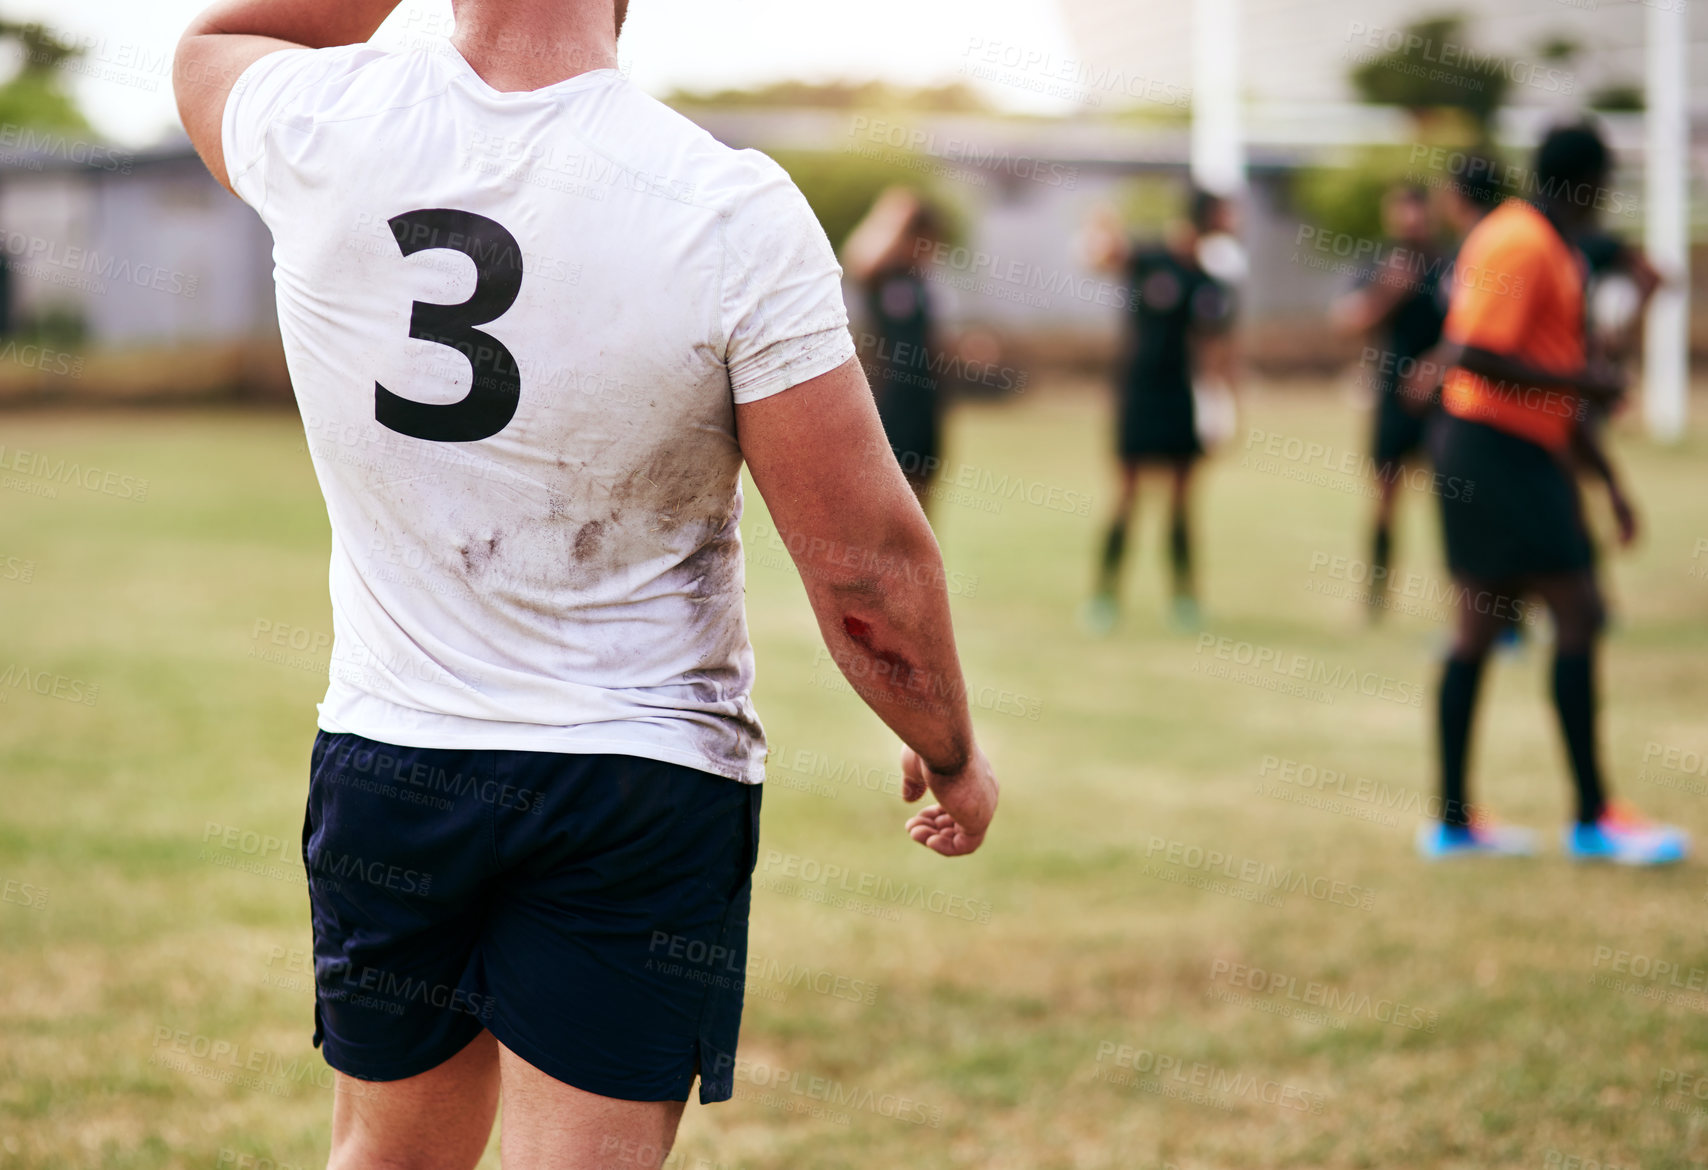 Buy stock photo Cropped shot of a man playing a game of rugby with his teammates in the background